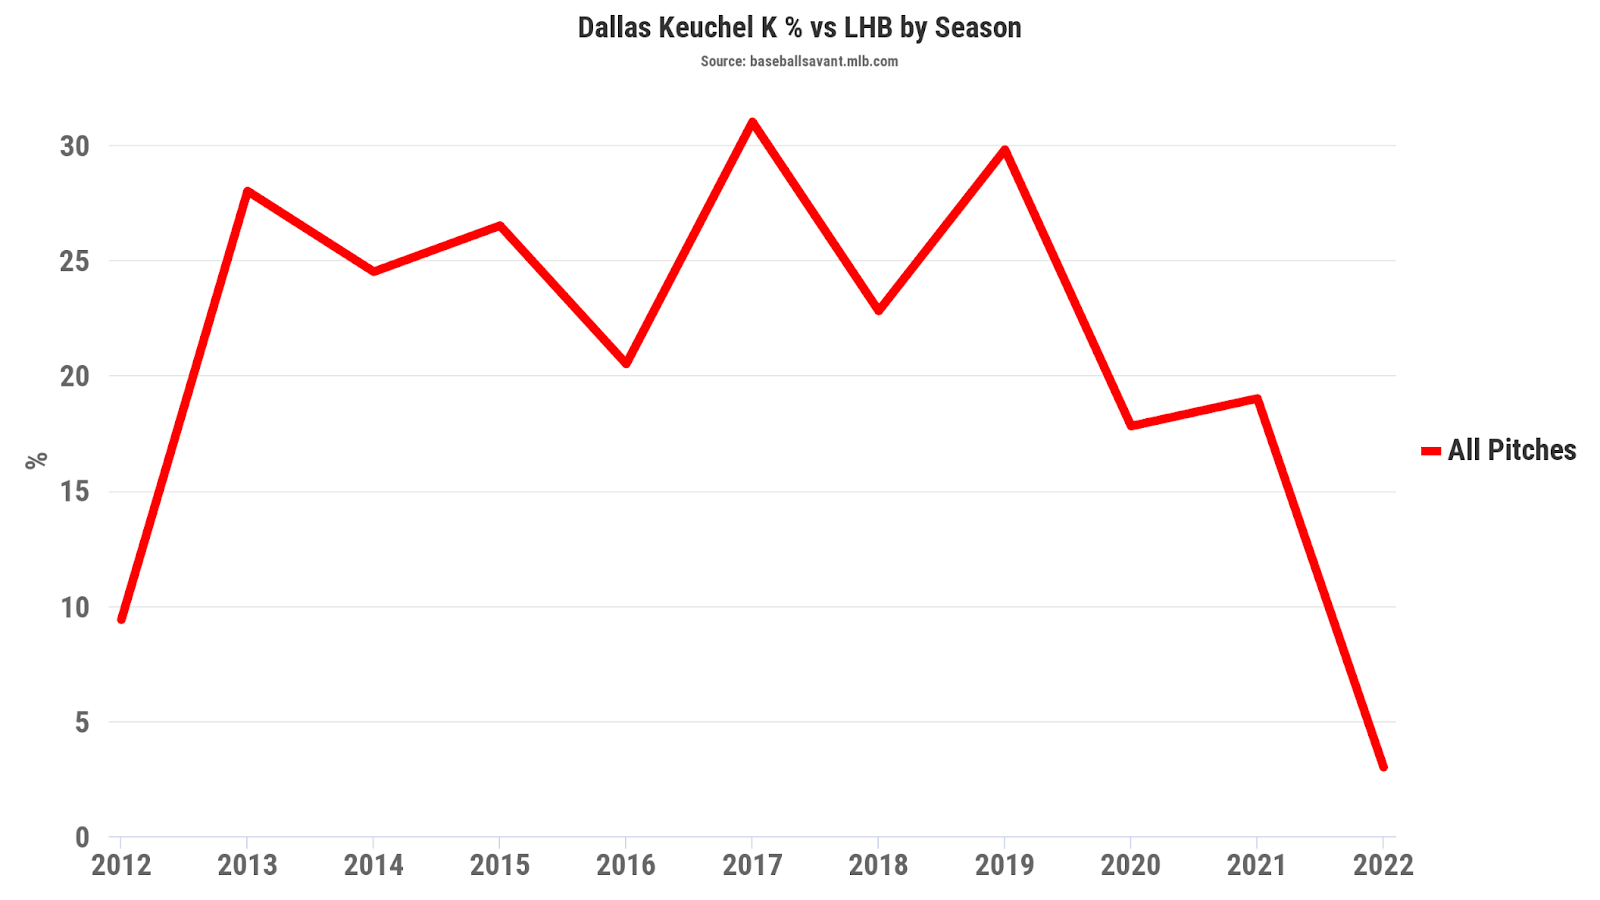 Dallas Keuchel's strikeout rate against left-handed hitters by season.